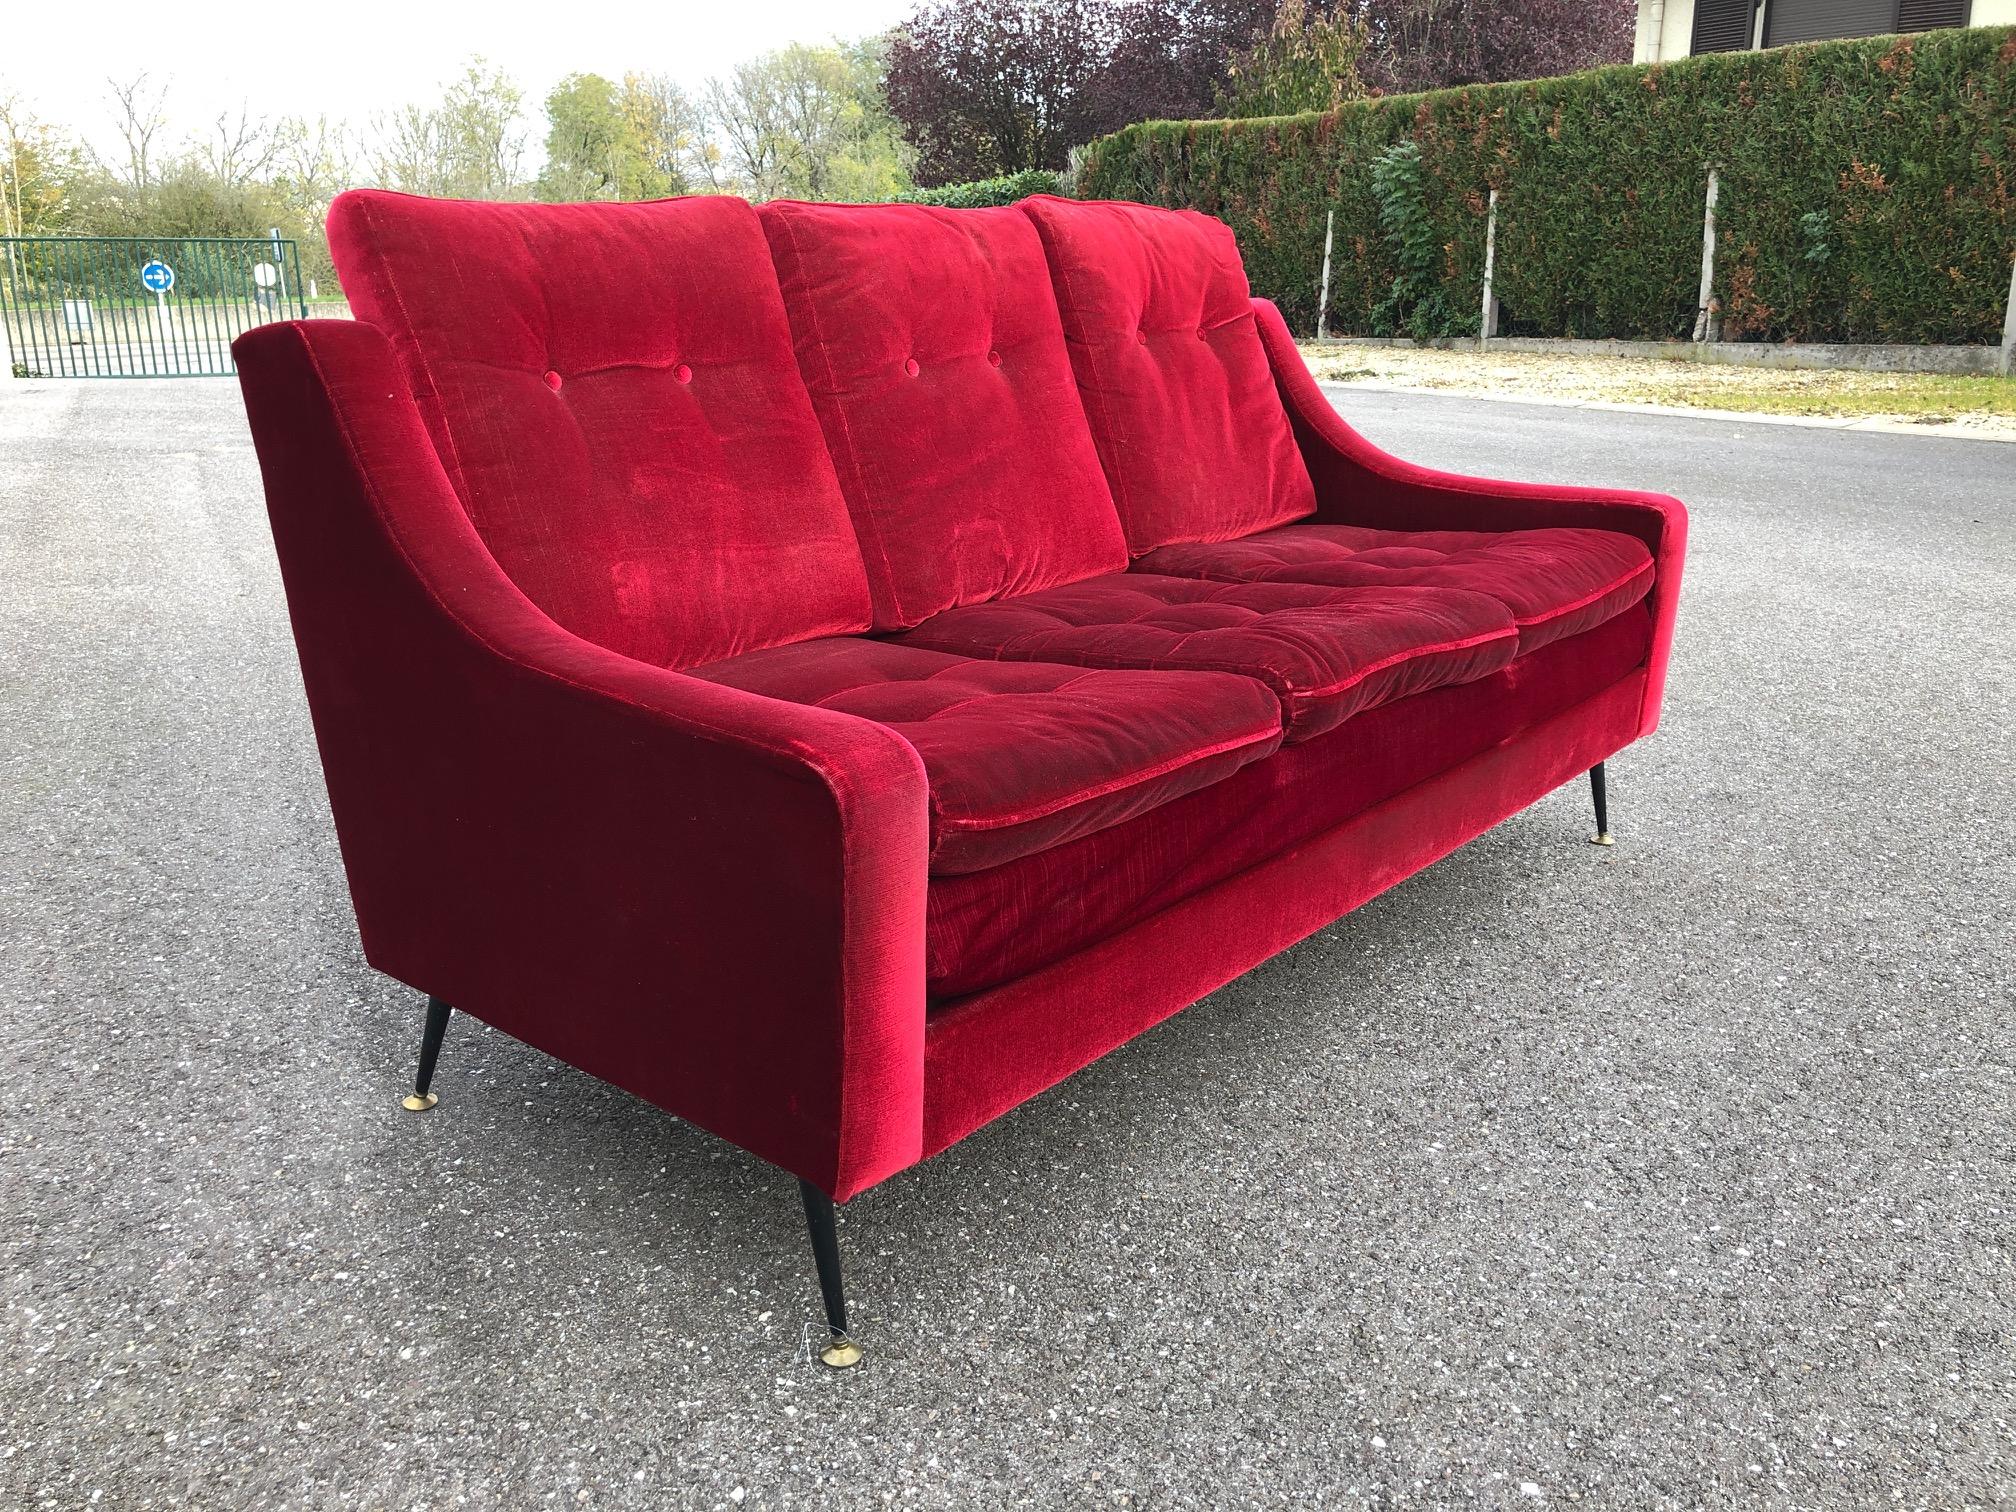 Red Velvet Sofa from the 1950s im Zustand „Gut“ in Brooklyn, NY